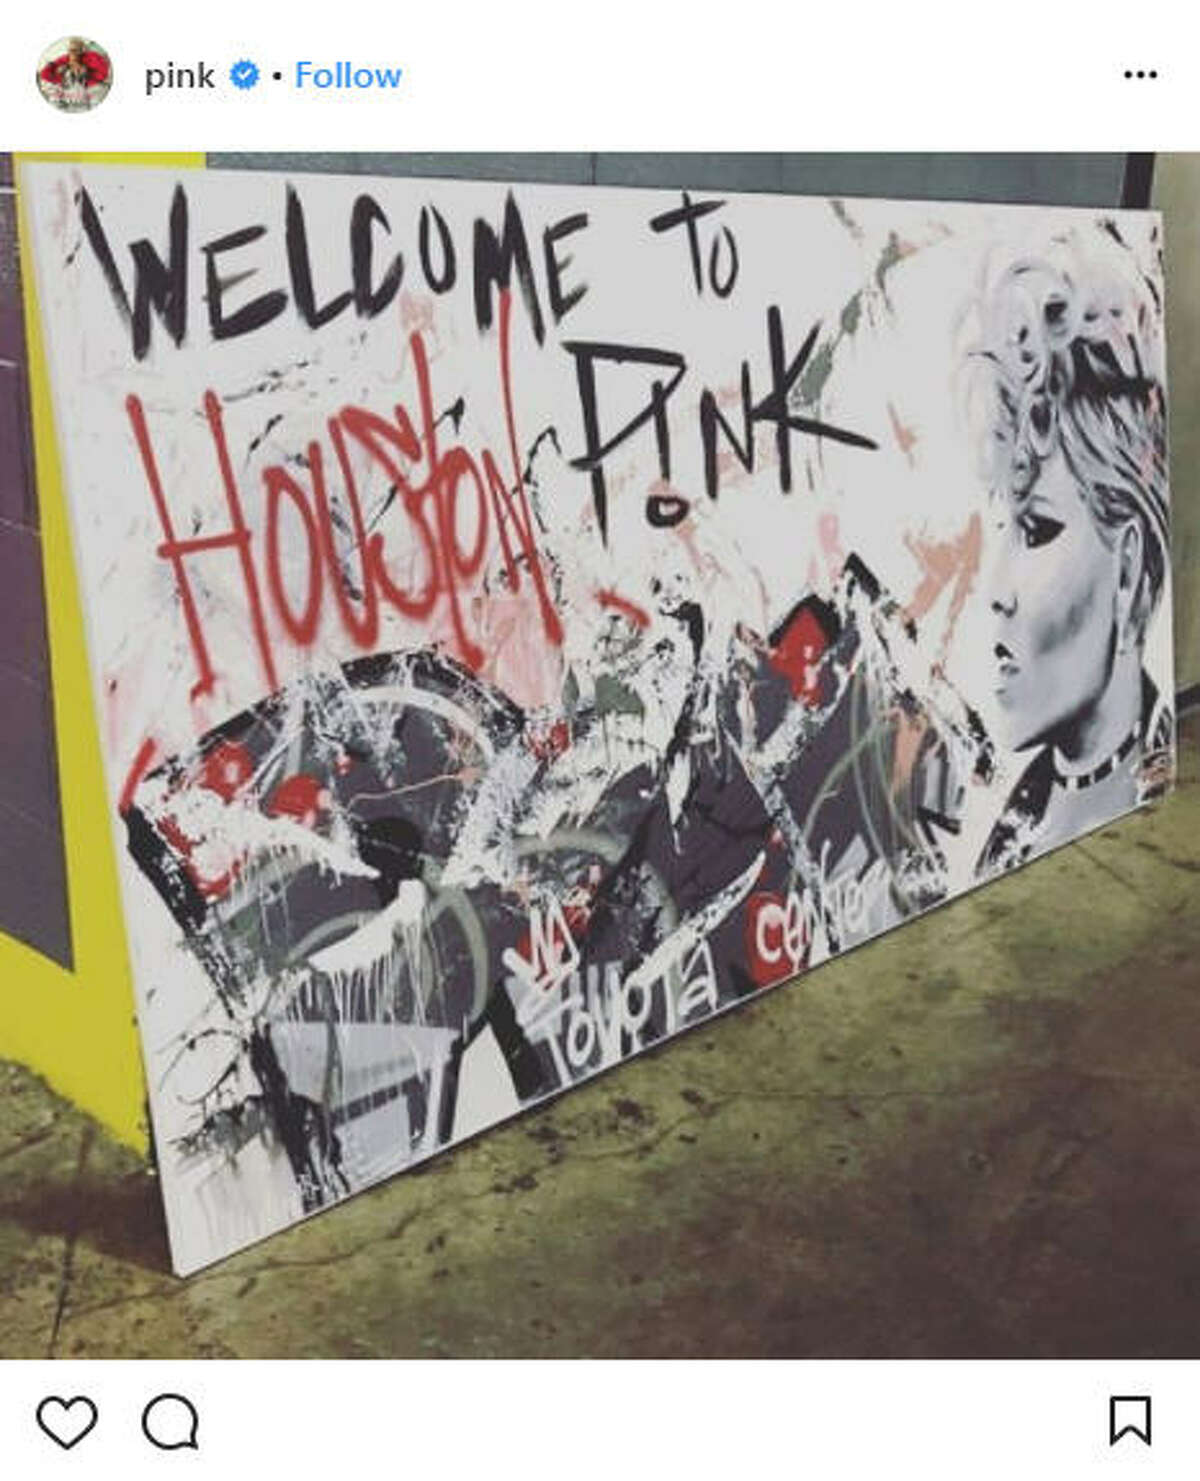 "Thank you Houston for an incredible night and @frankycardona for amazing art." Source: Instagram